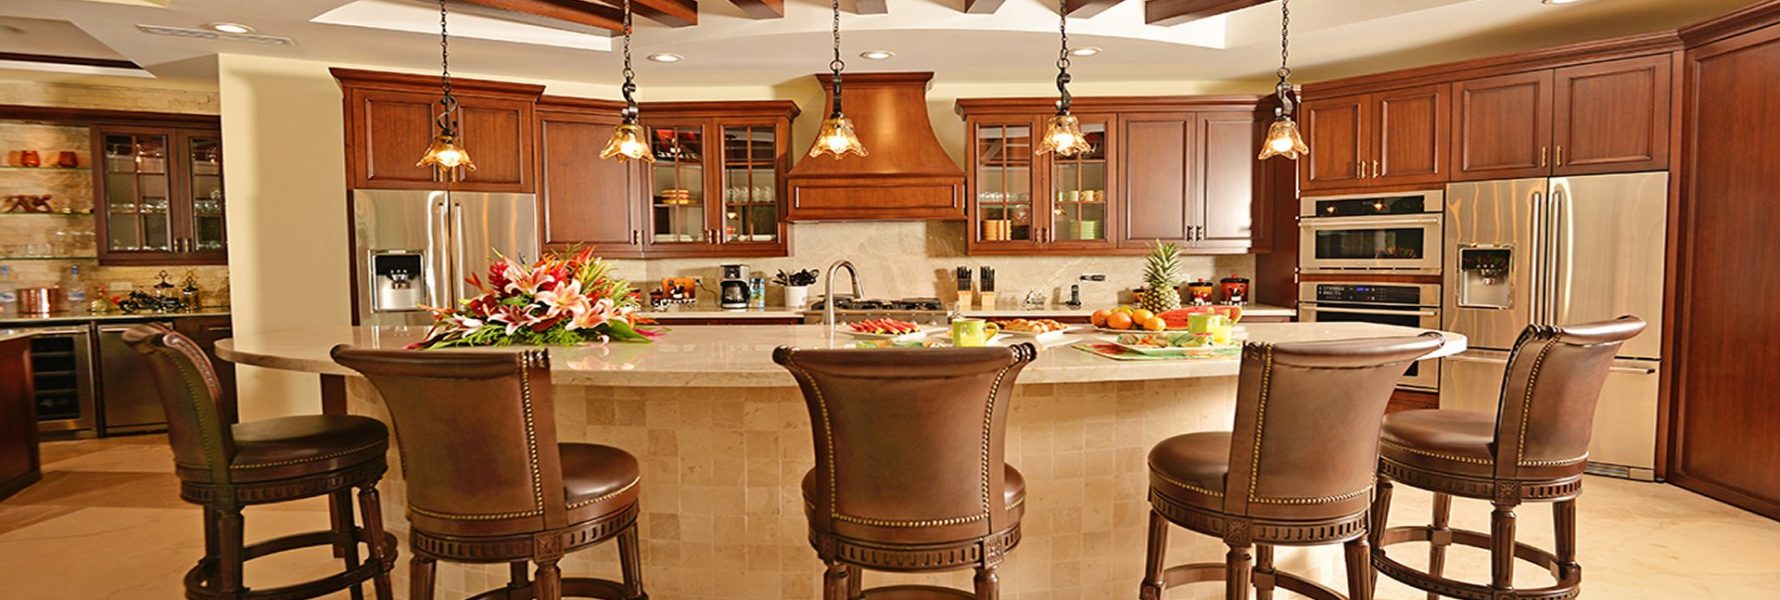 Kitchen area has all the amenities anyone could ask for, prepare meals for the special people in your life